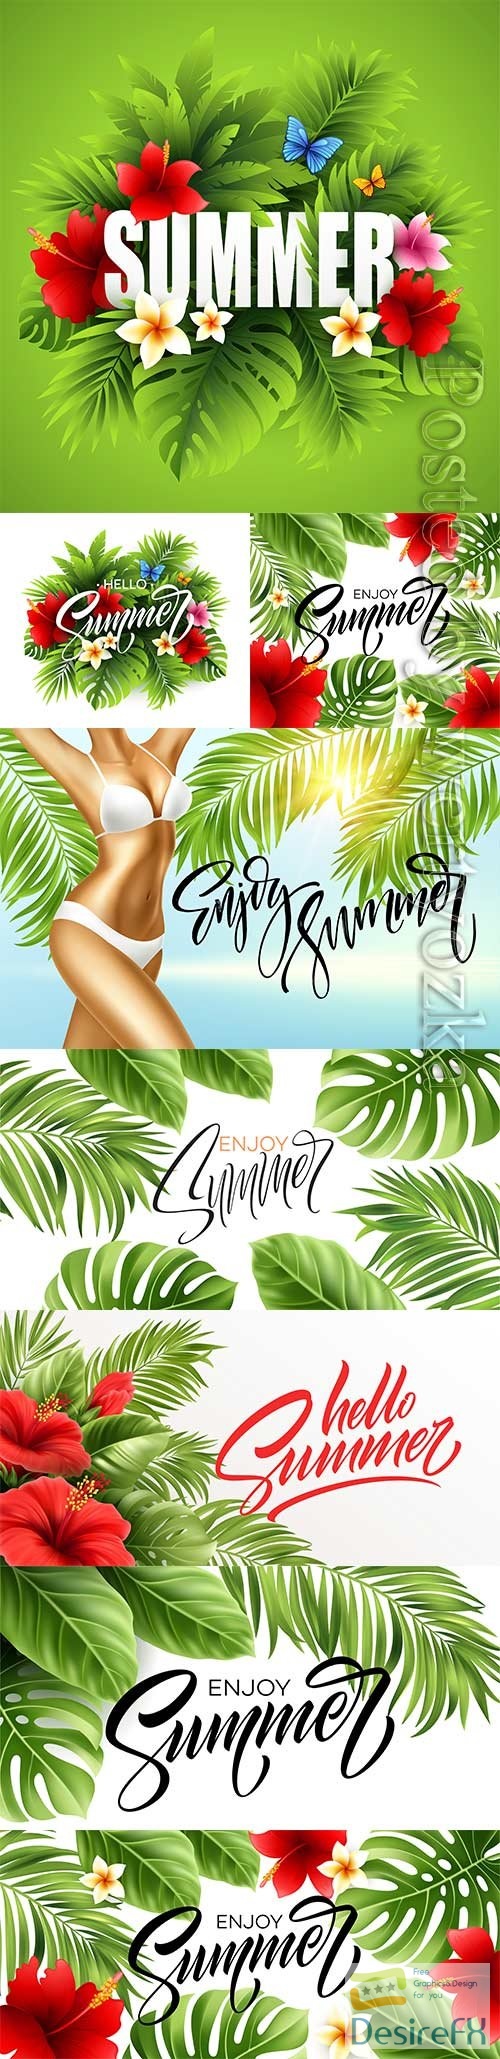 Summer poster with tropical palm leaf and handwriting lettering